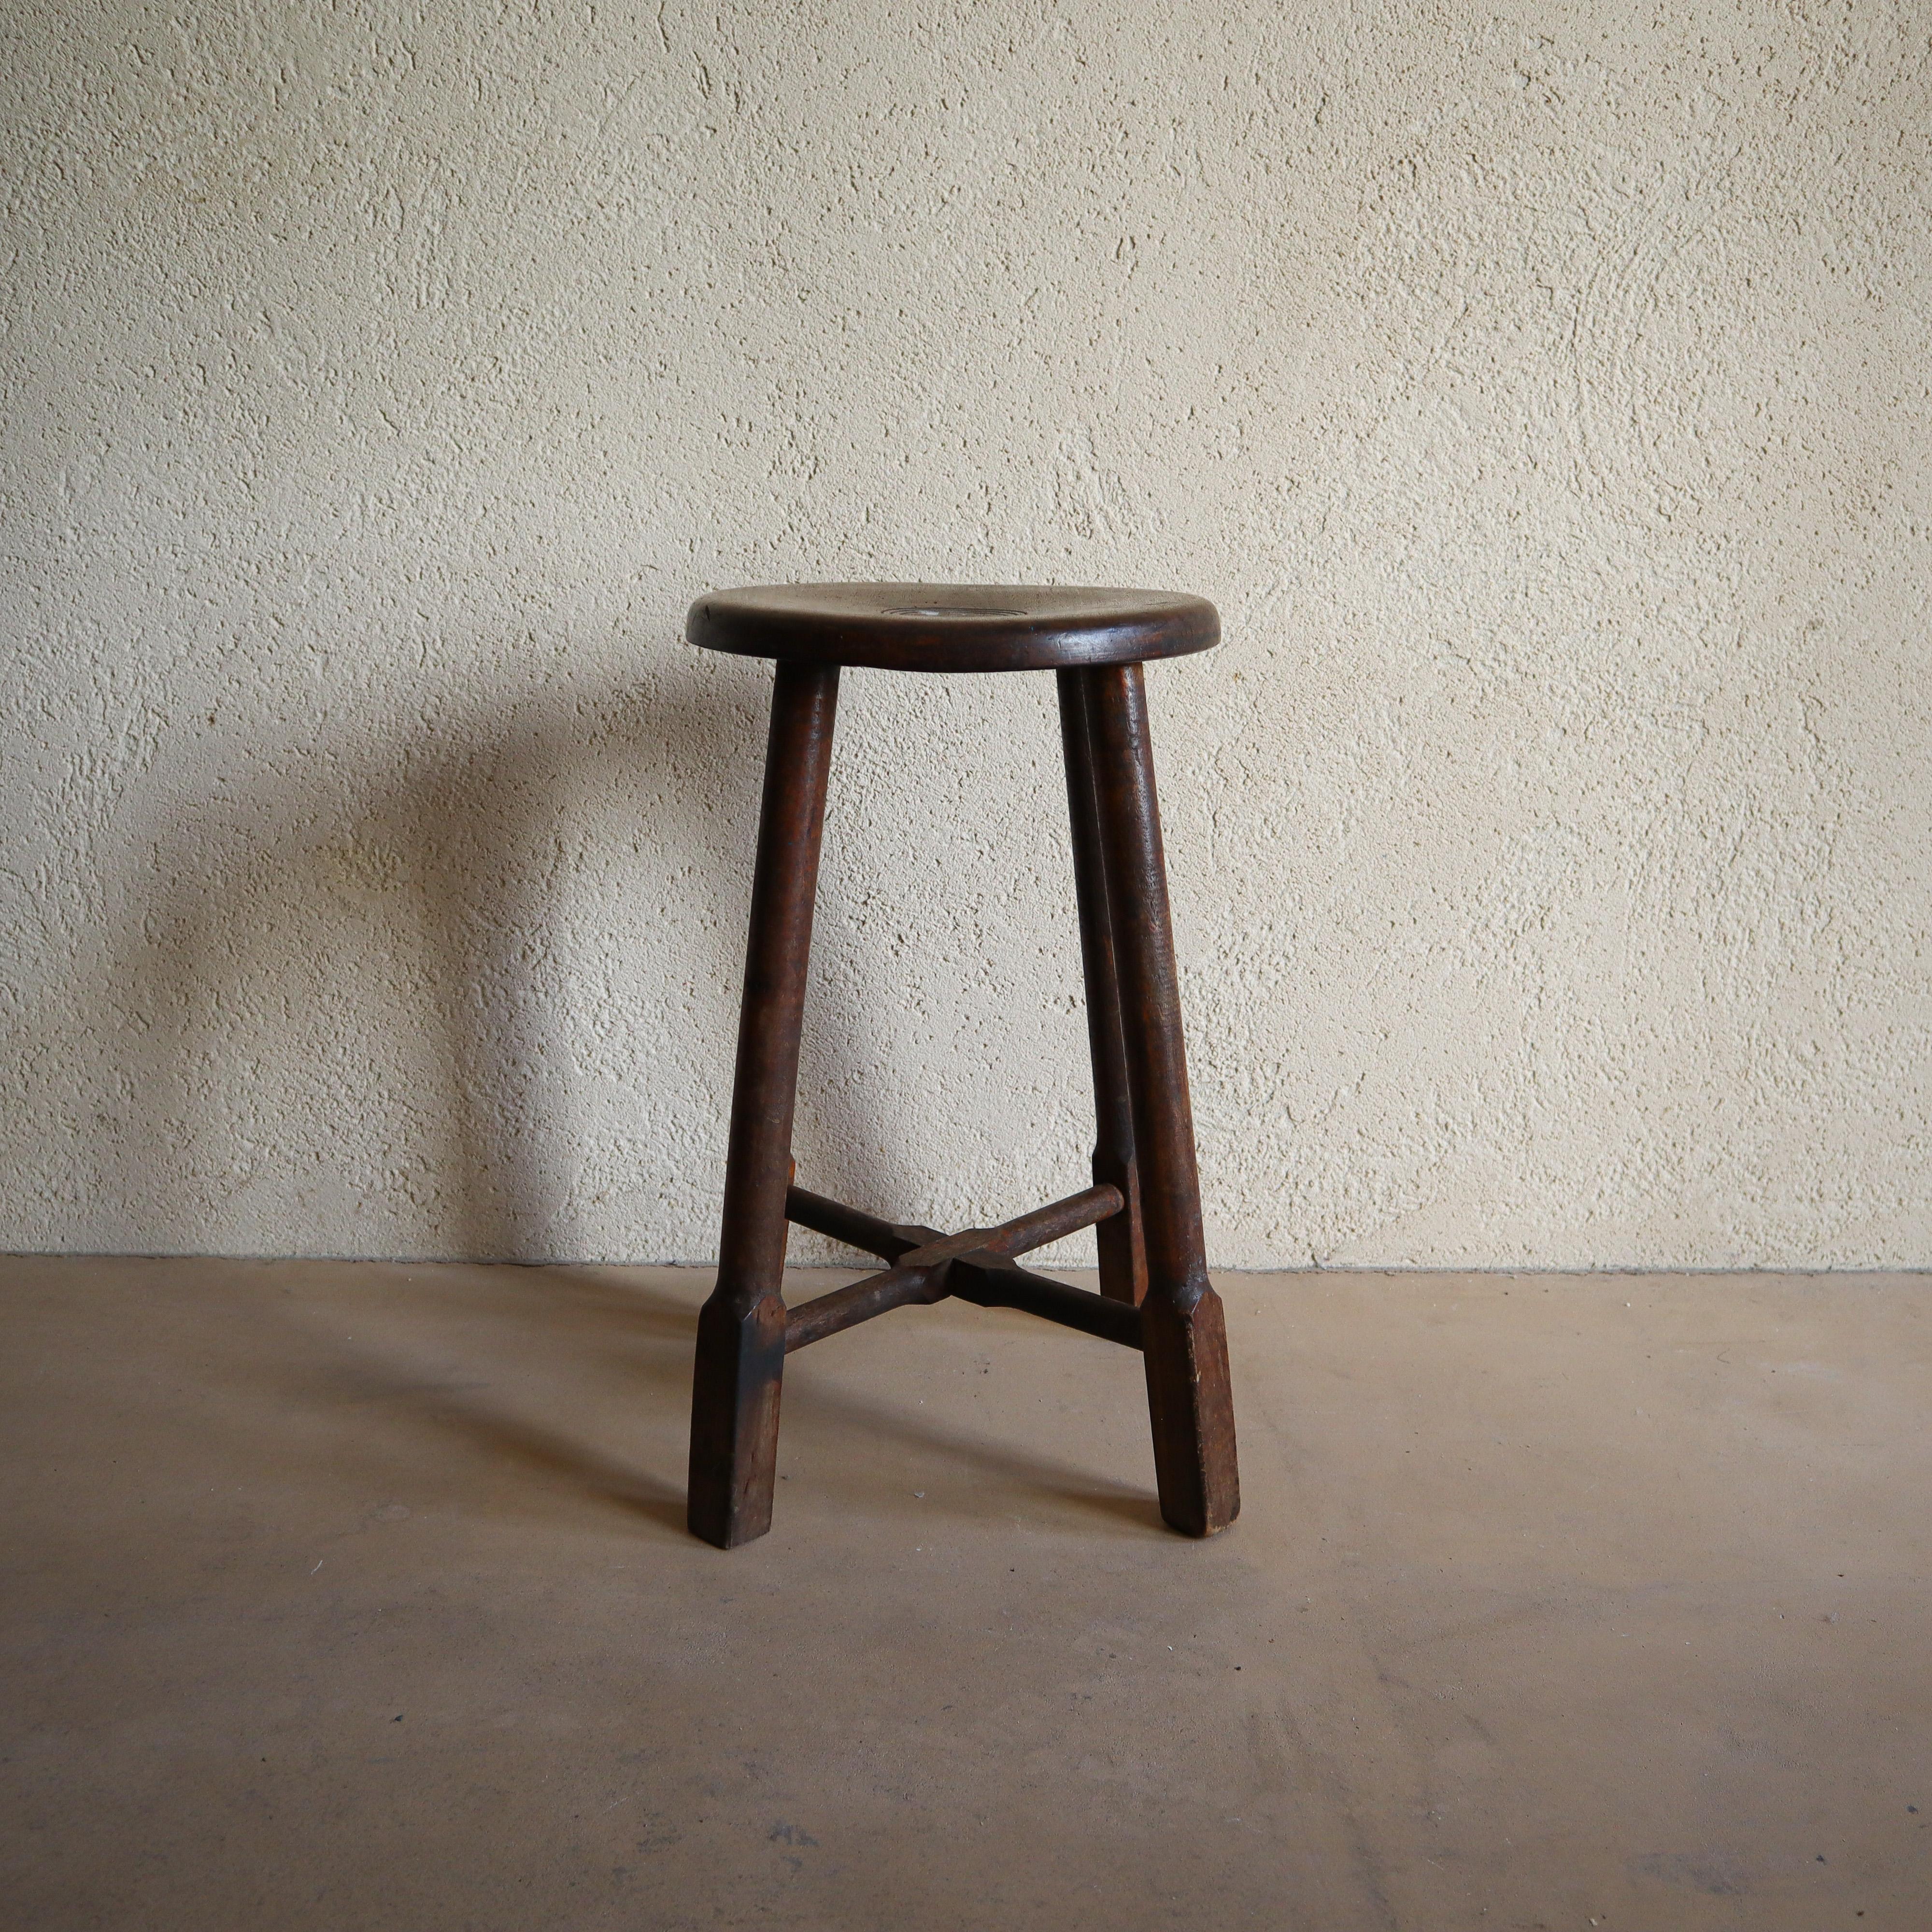 Antique handmade wooden stool showcasing traditional Japanese craftsmanship. Structurally sound with a beautiful patina, this stool is not only a piece of history but functional art that can be used for daily seating.

Country of Origin: